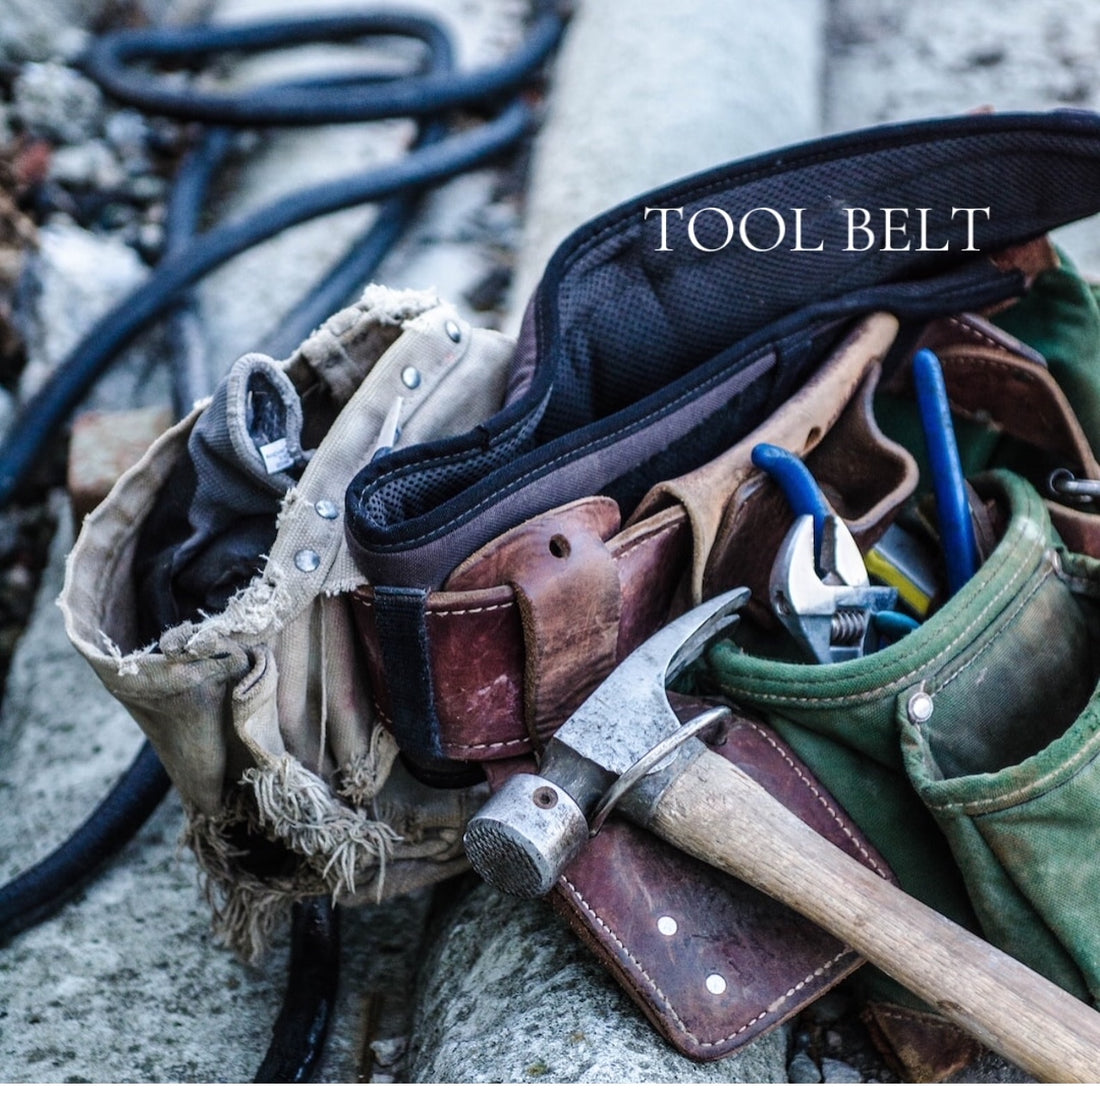 TOOL BELT - Room and Body Spray, Buy 1 get 1 Body Butter FREE